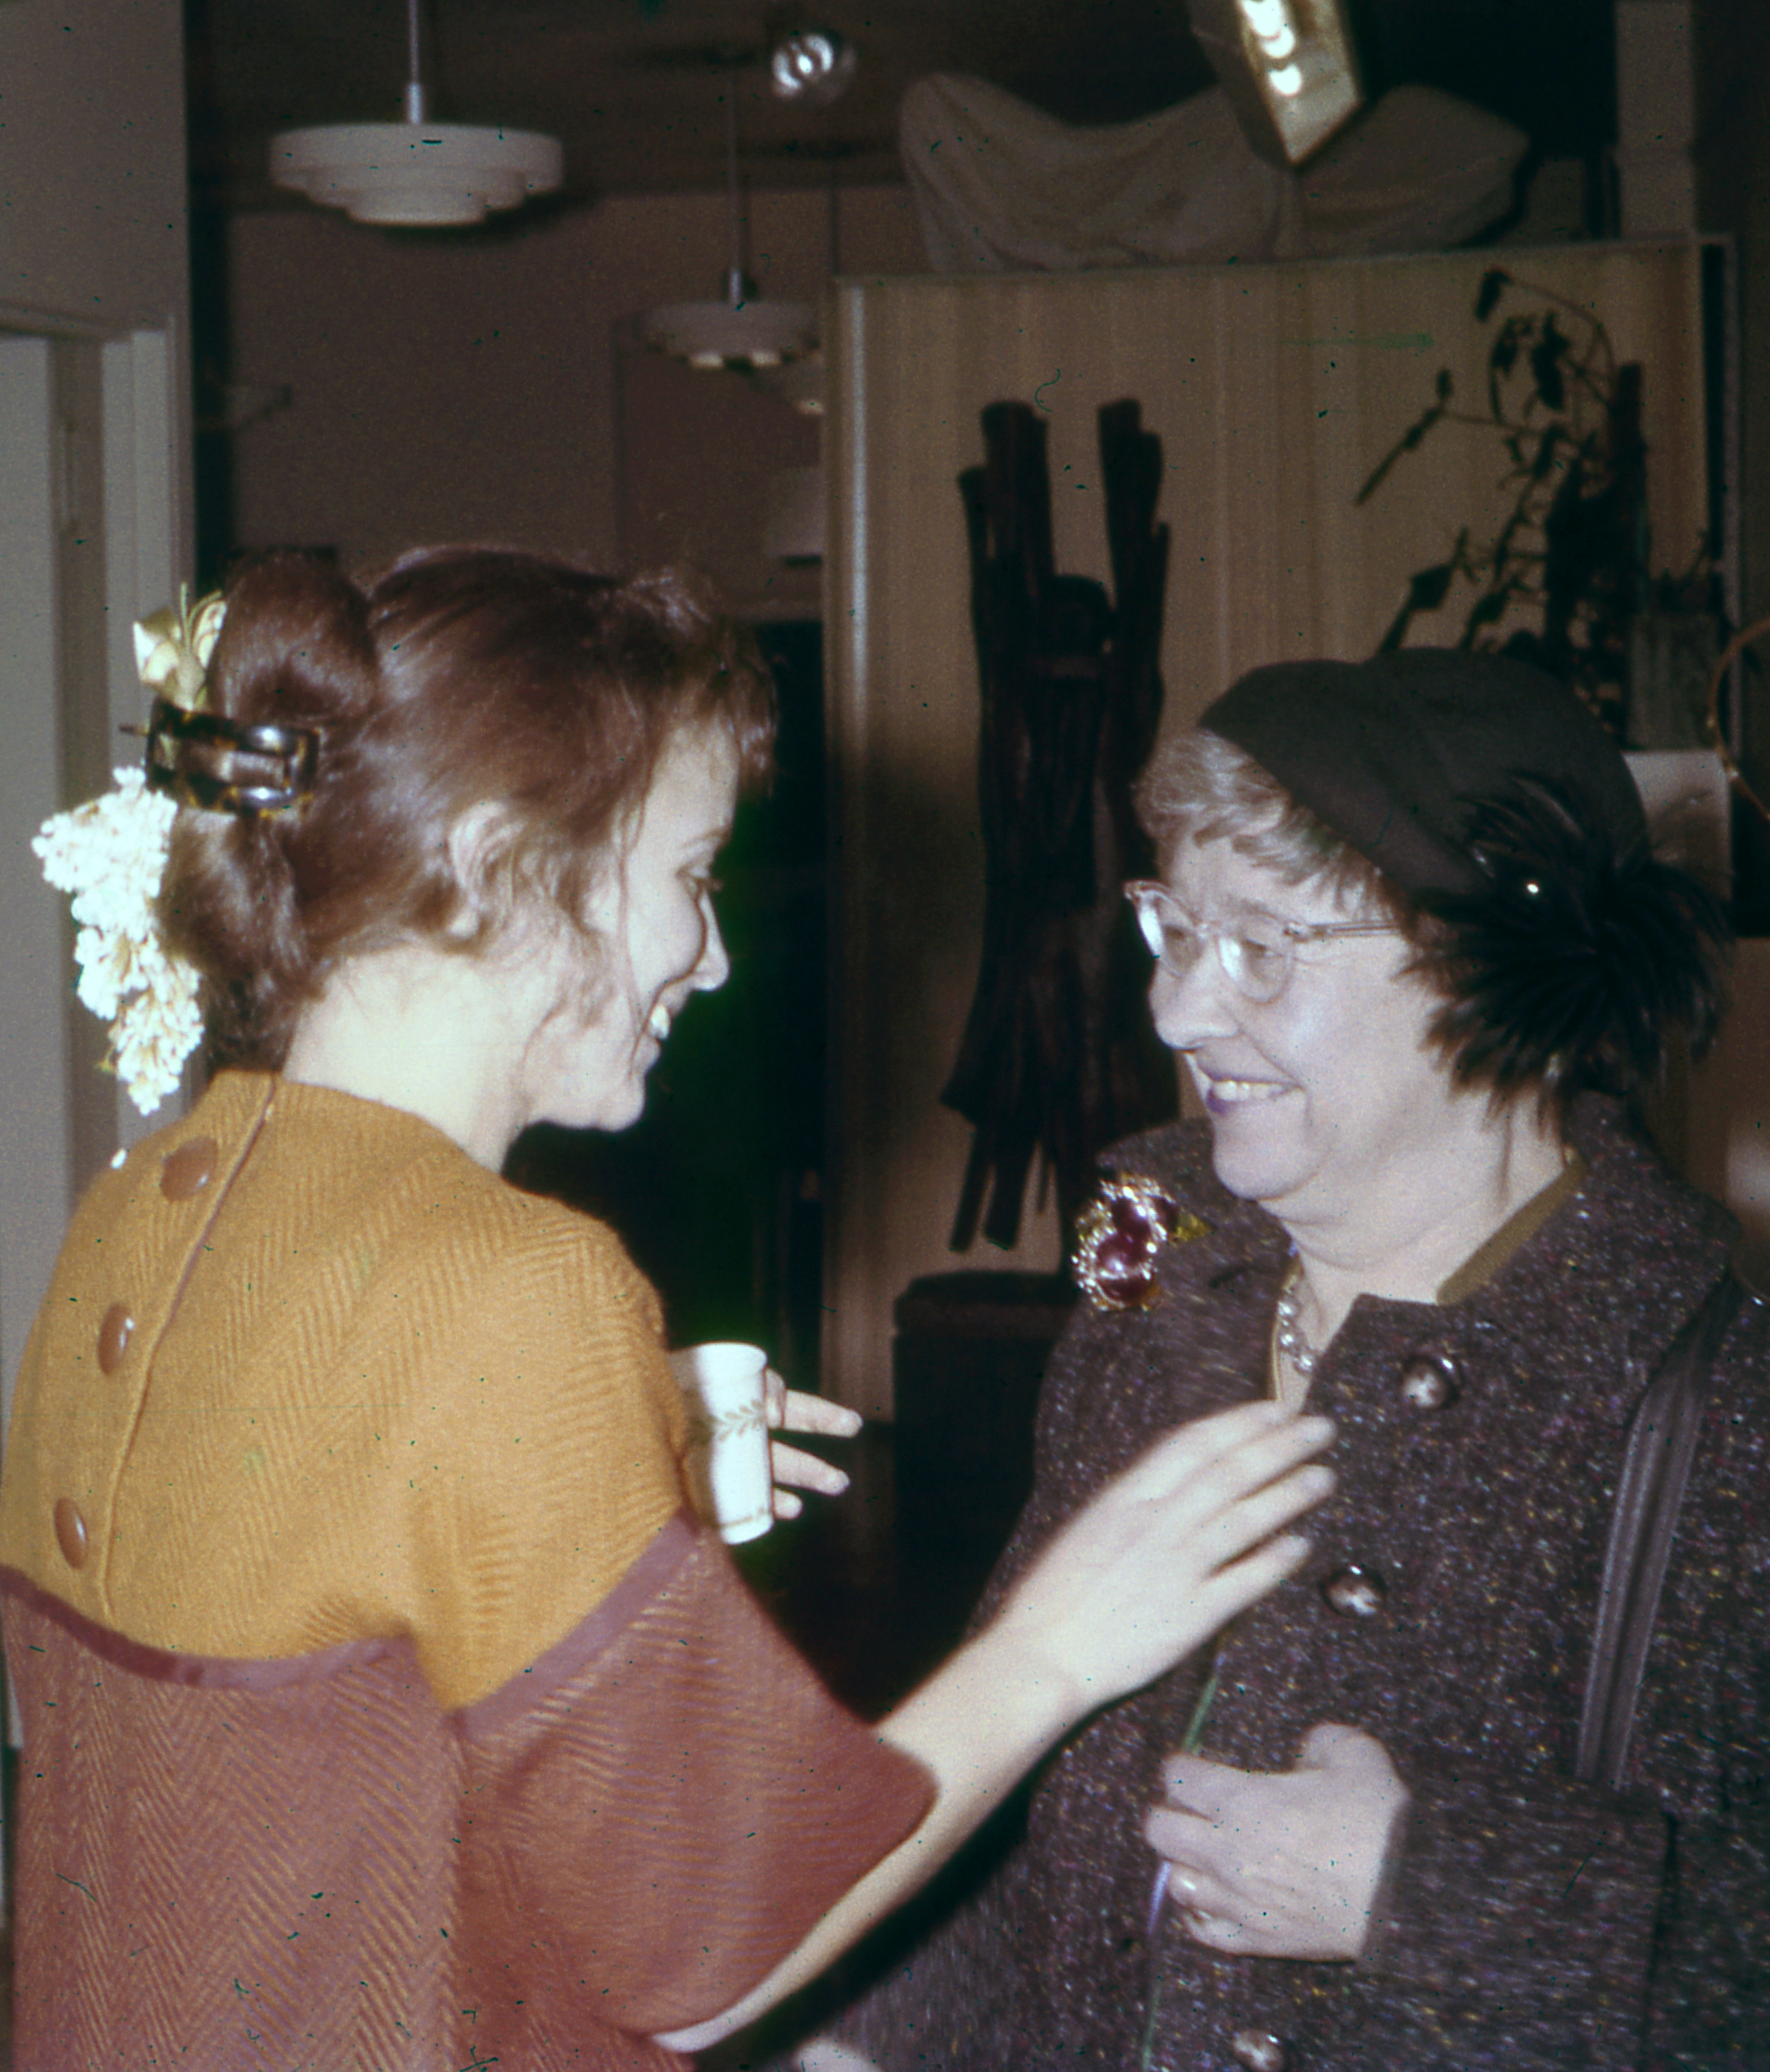 Photograph from the 1960s of two women with light-beige skin, one older and the other younger, conversing in business-causal attire